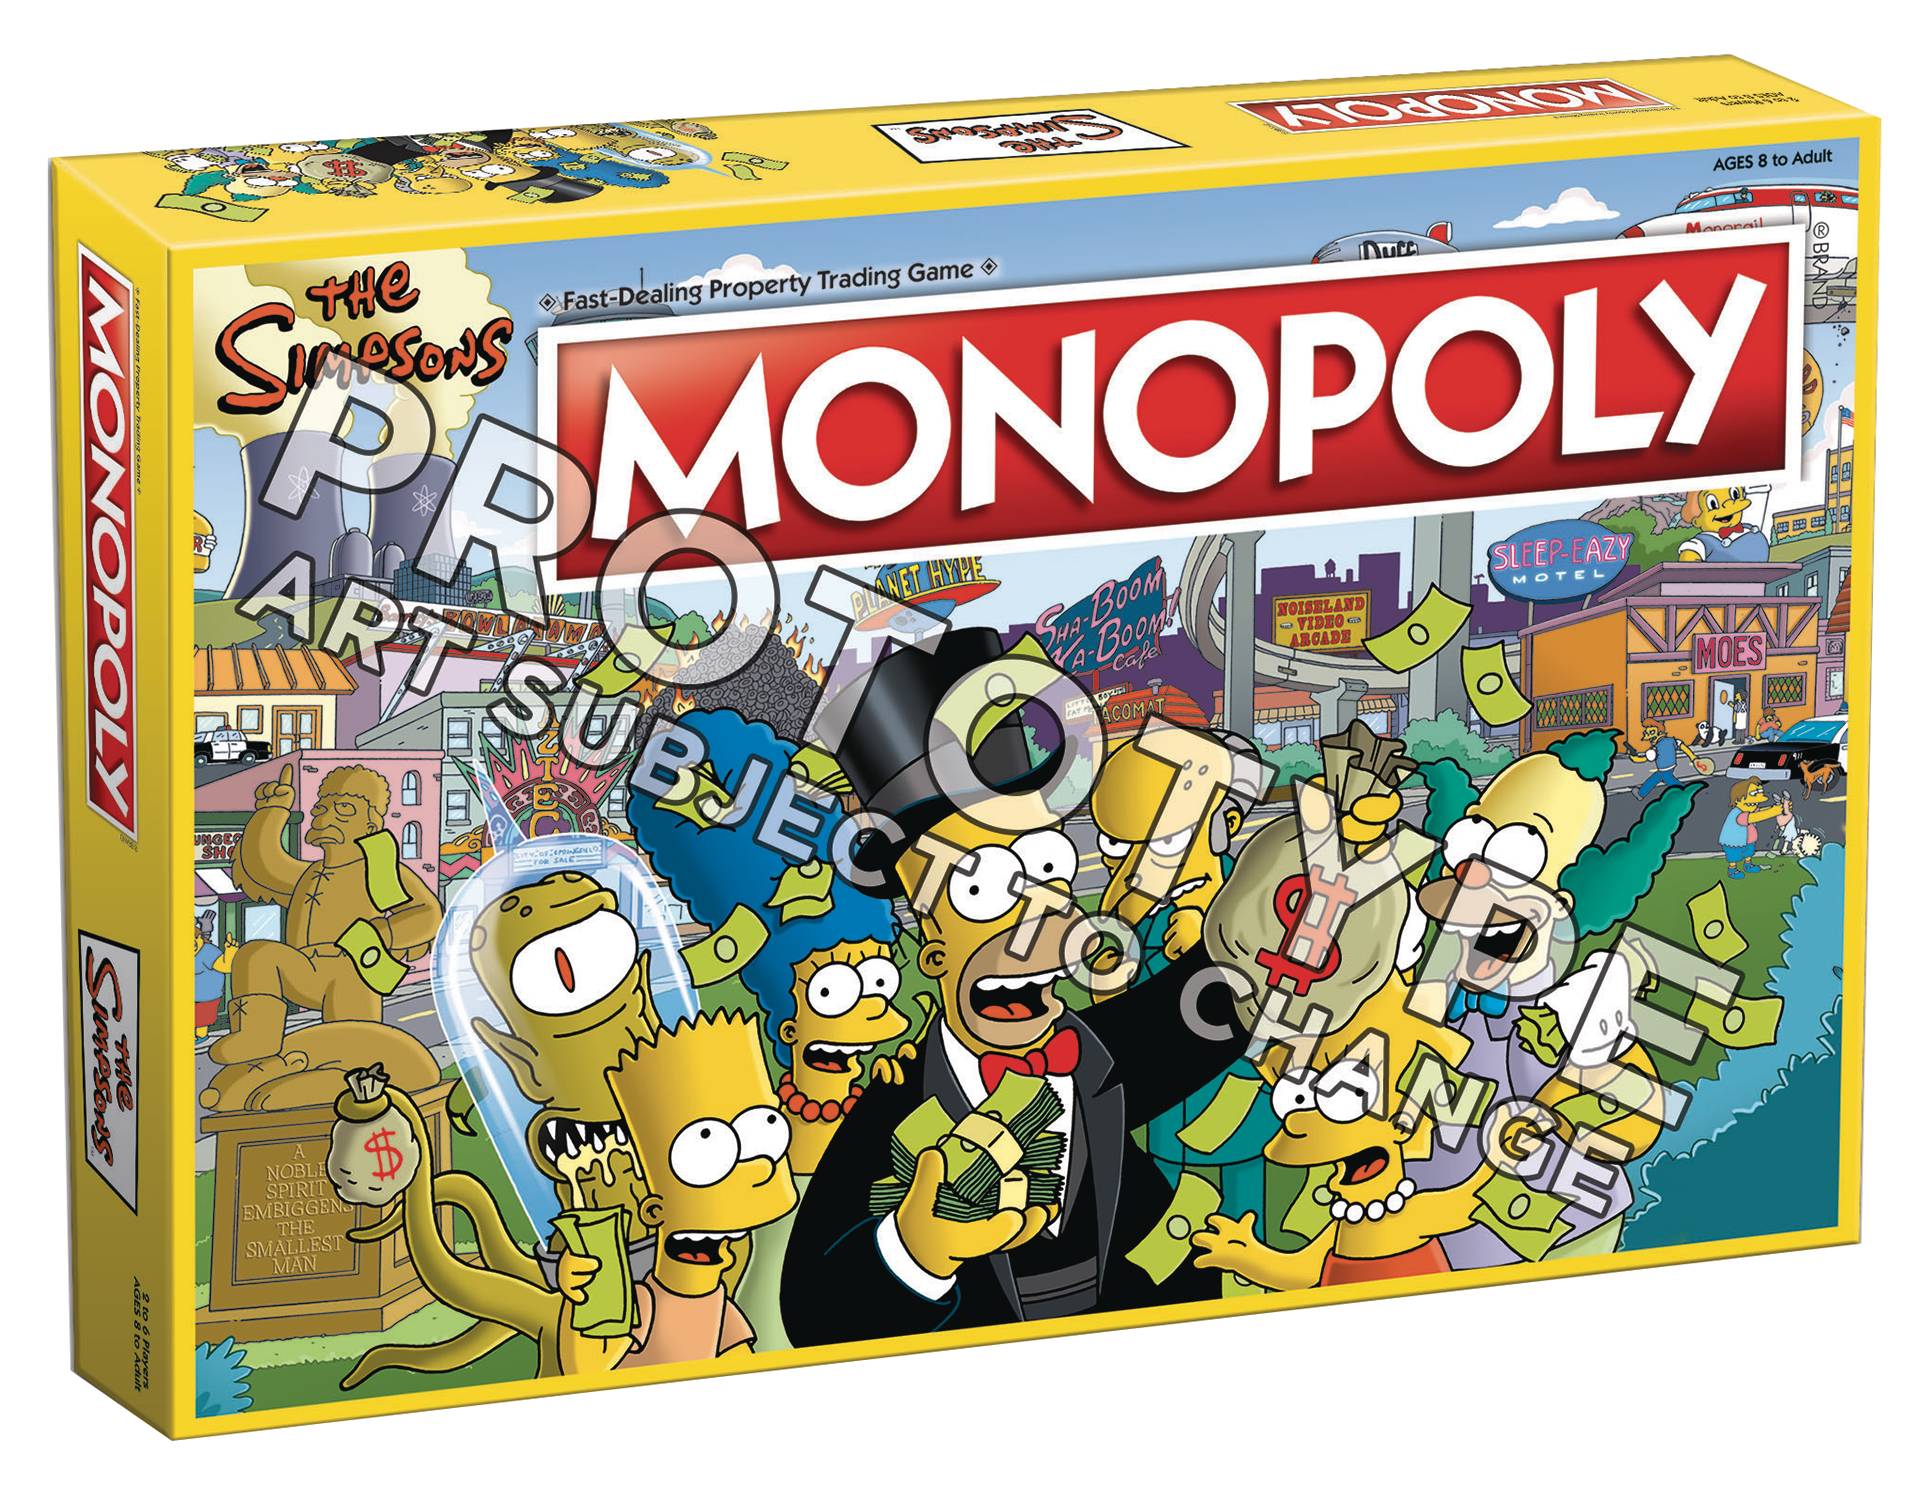 Monopoly Simpsons Edition Boardgame